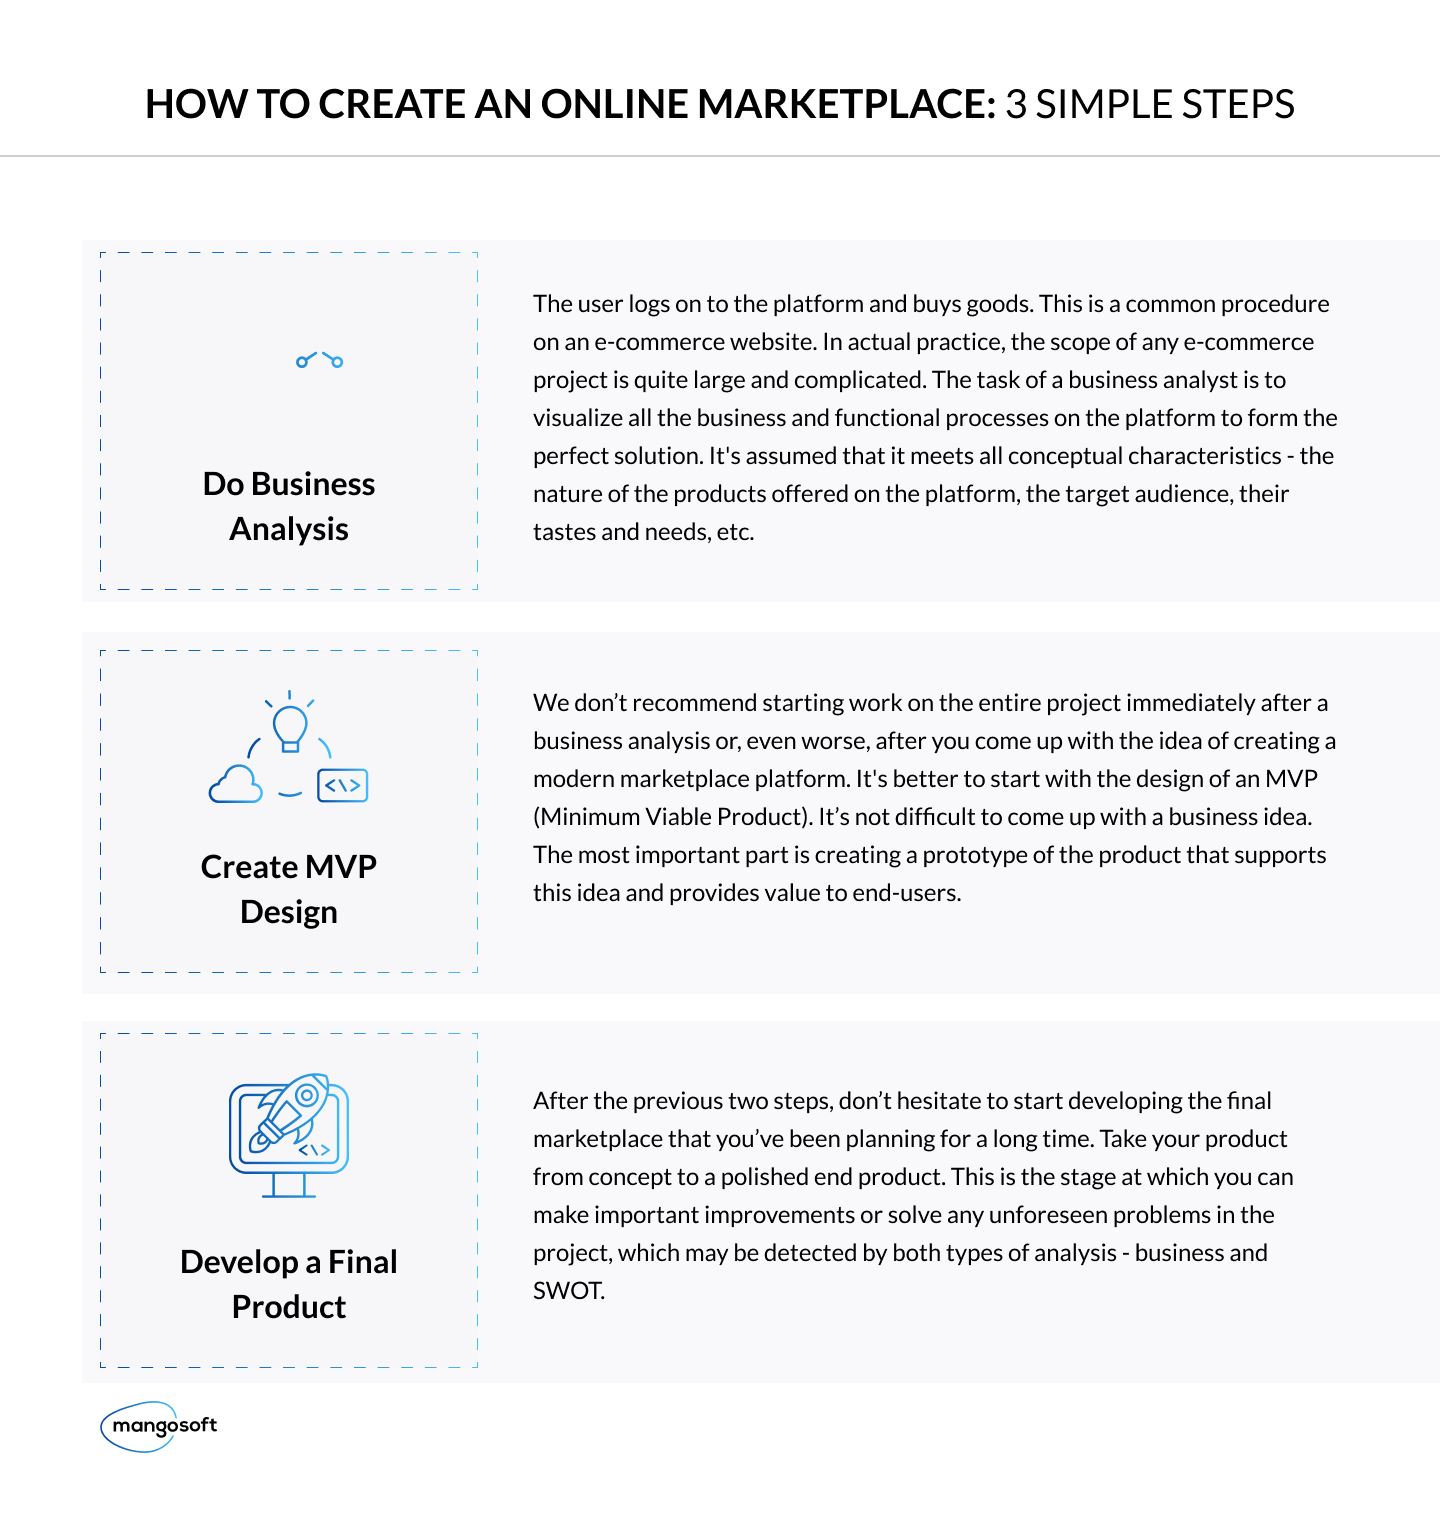 How Much Does It Cost to Build a Marketplace? - 7